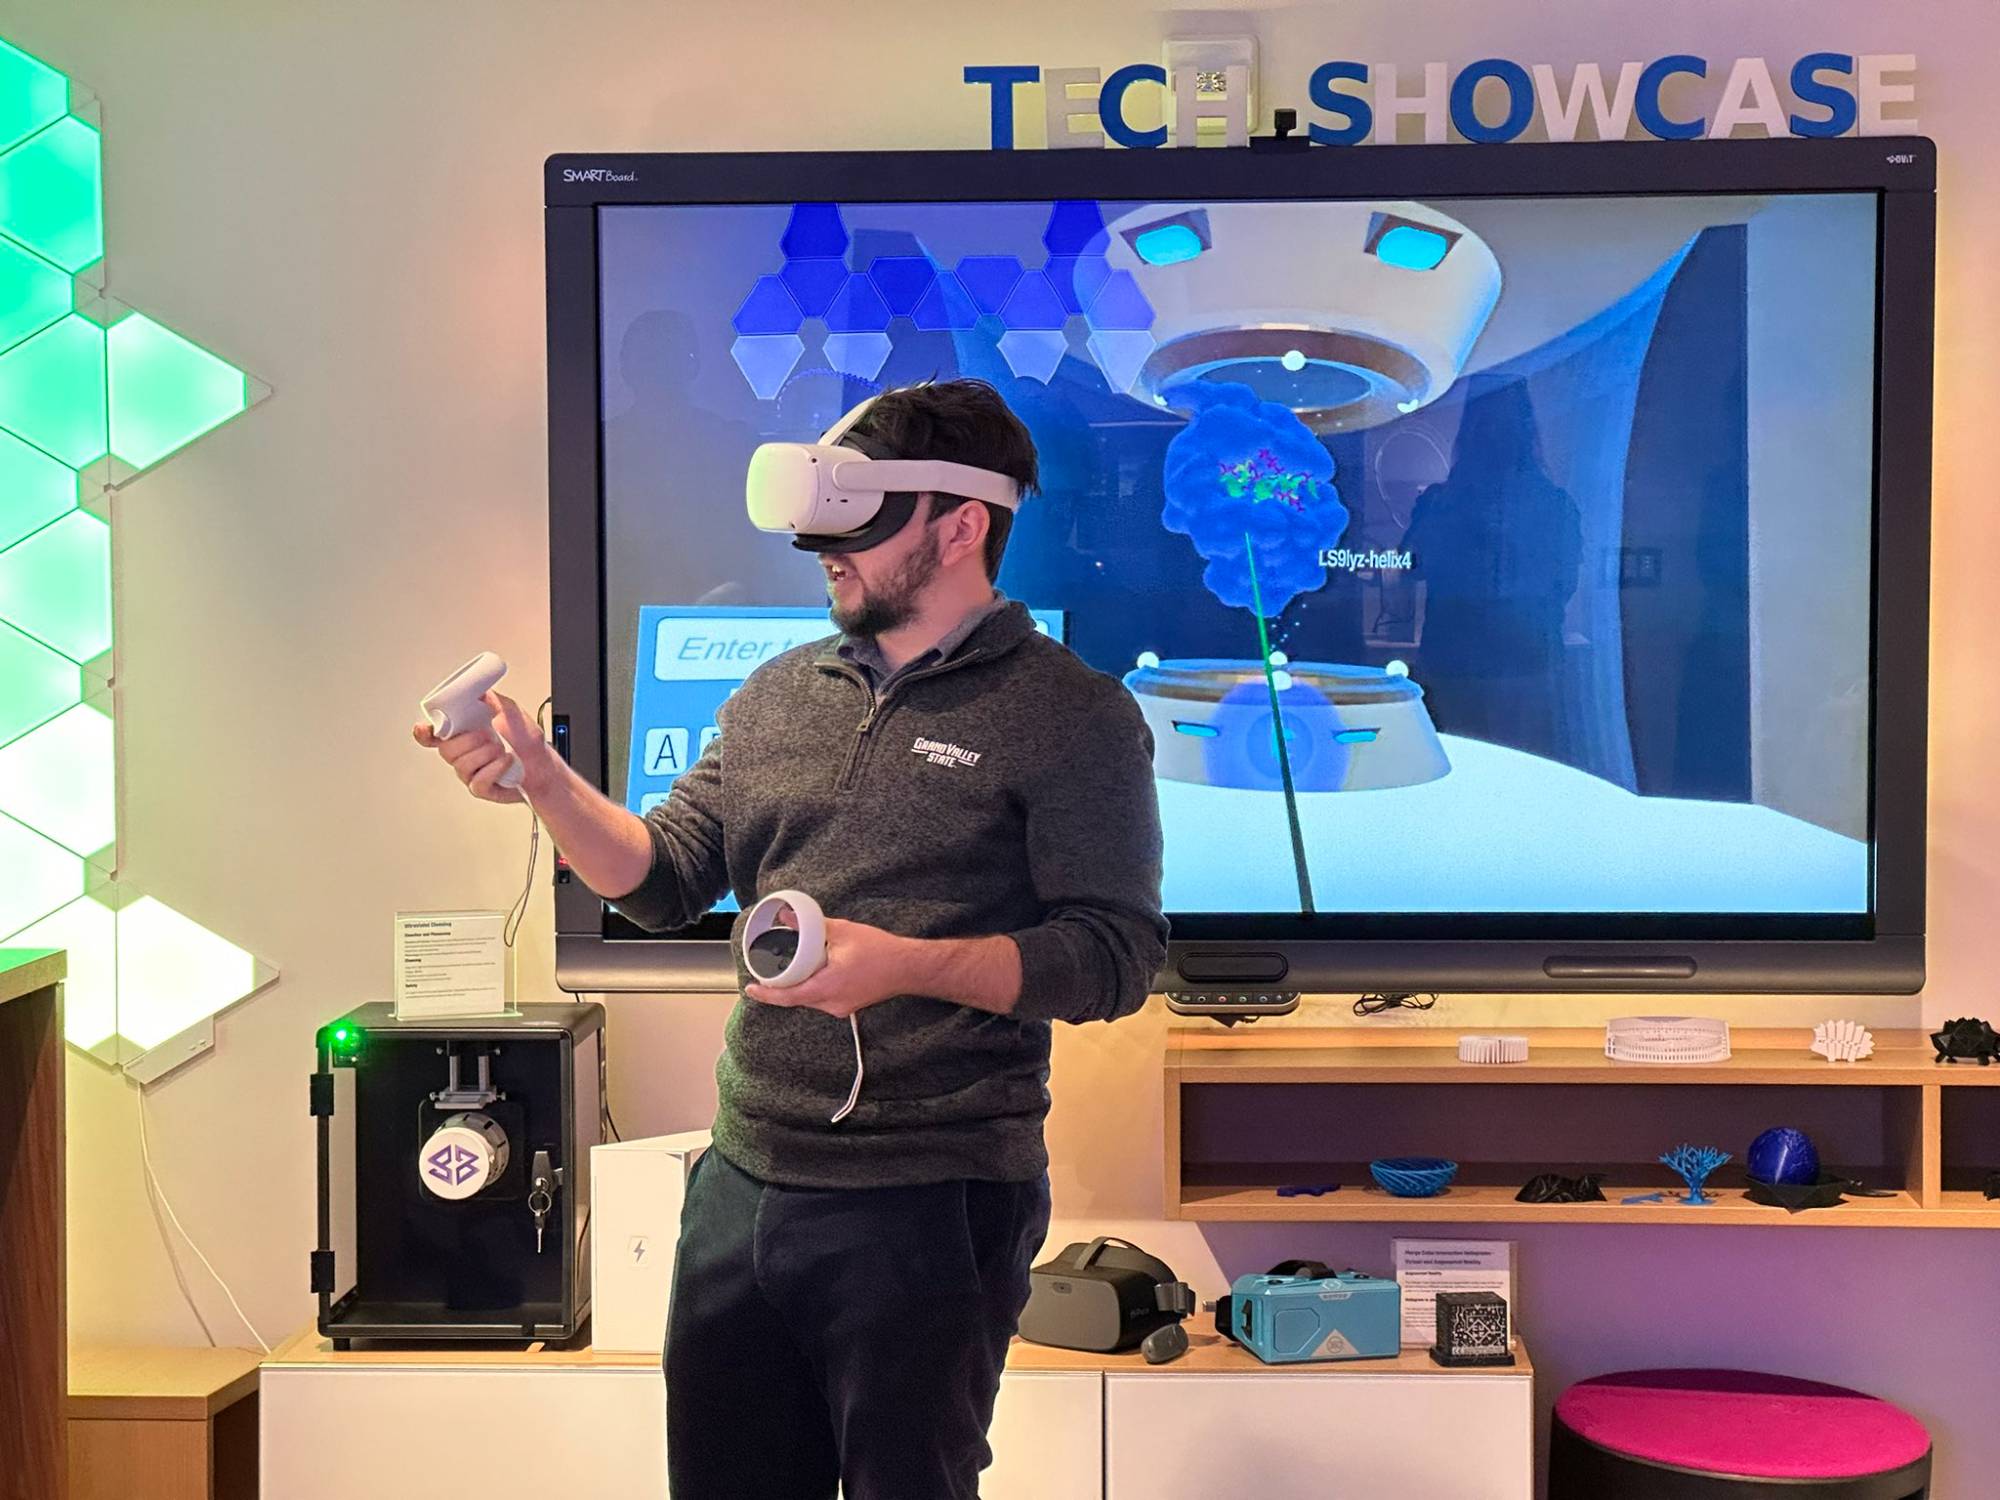 Man in grey shirt and jeans wearing virtual reality headset with large tv screen in the background